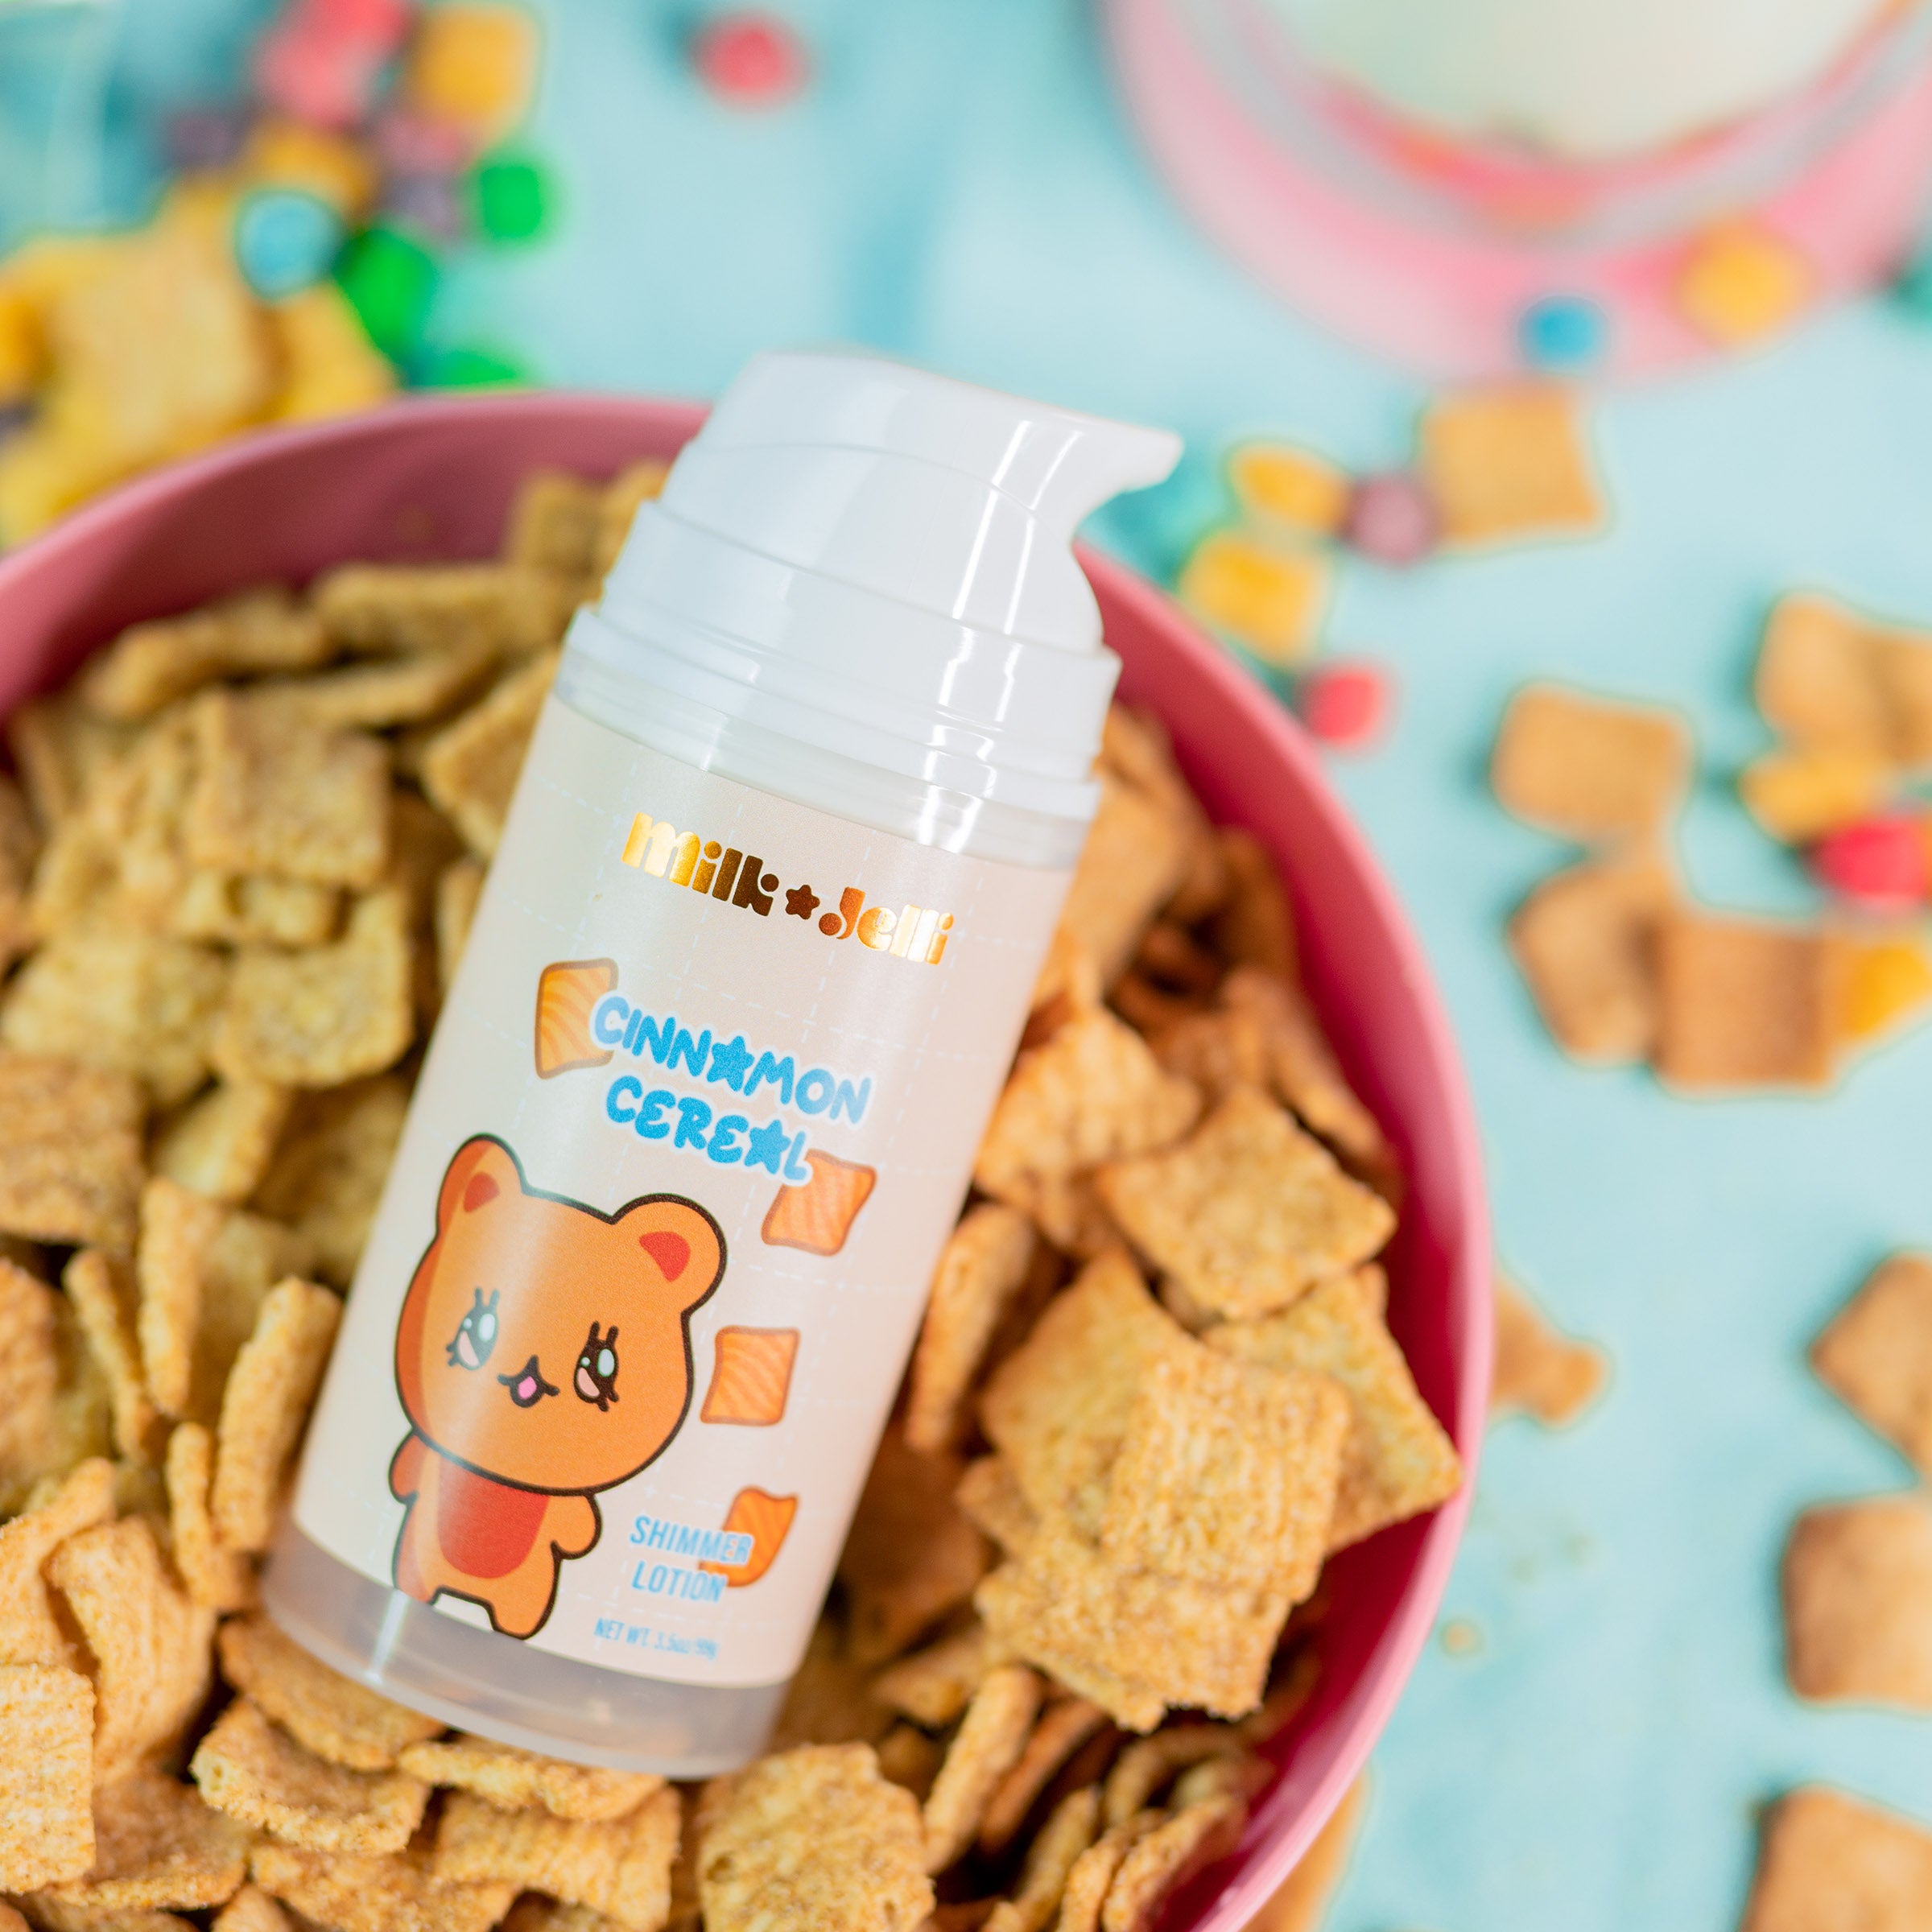 Cinnamon Cereal - Shimmer Lotion